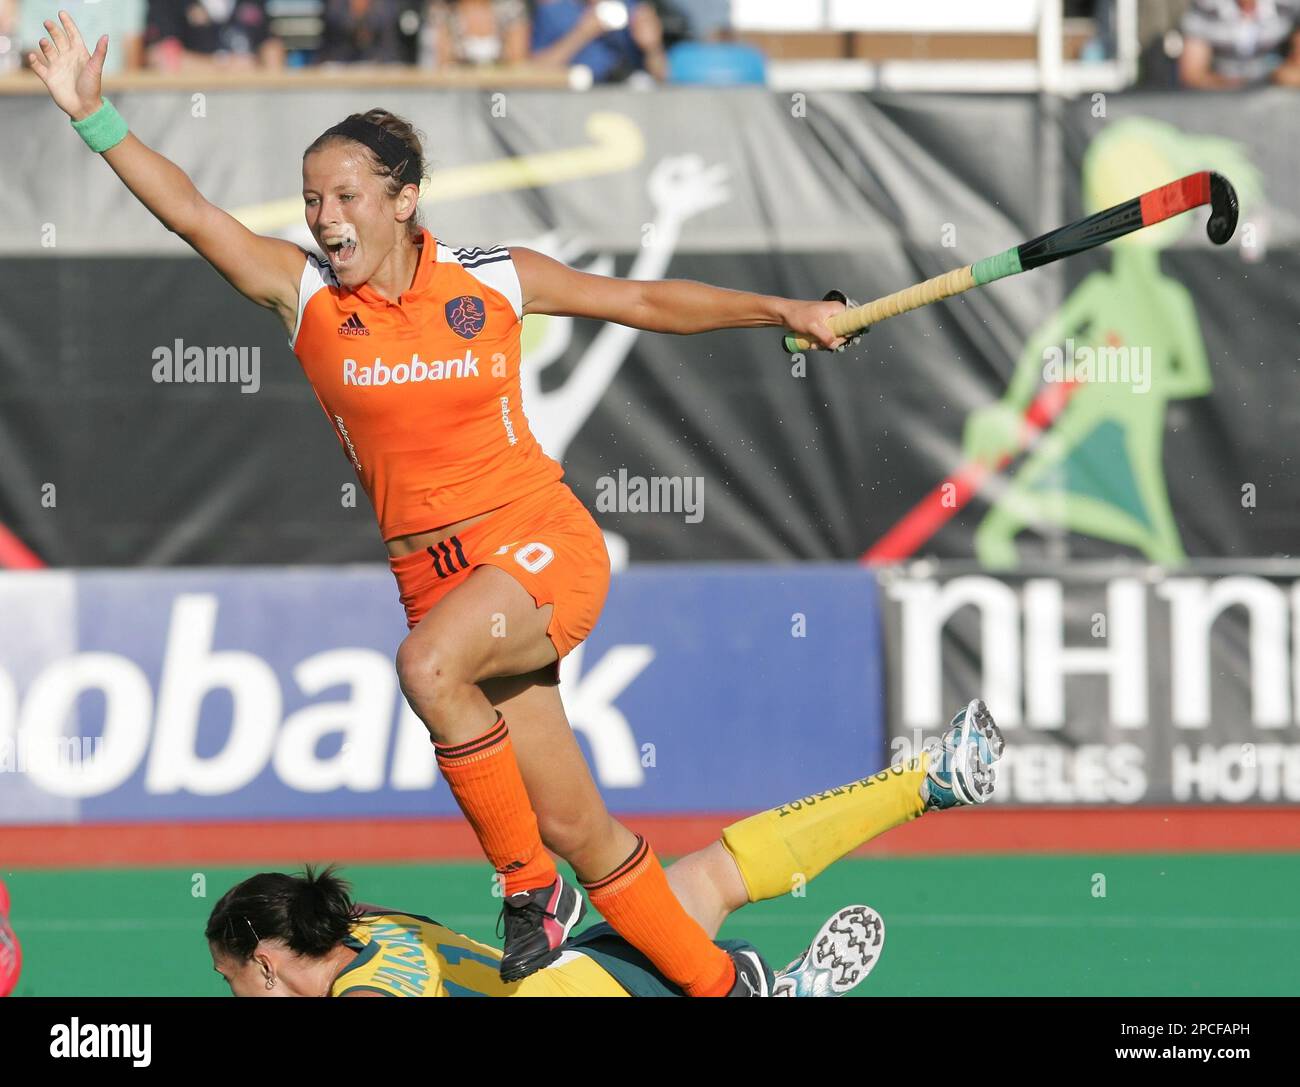 Dutch player Sylvia Karres celebrates after score against Australia during the Women's Hockey World Cup final match against Australia in Madrid, Sunday Oct. 8, 2006. Netherlands beat Australia 3-1 and won the gold medal. (AP Photo/Bernat Armangue) Stock Photo